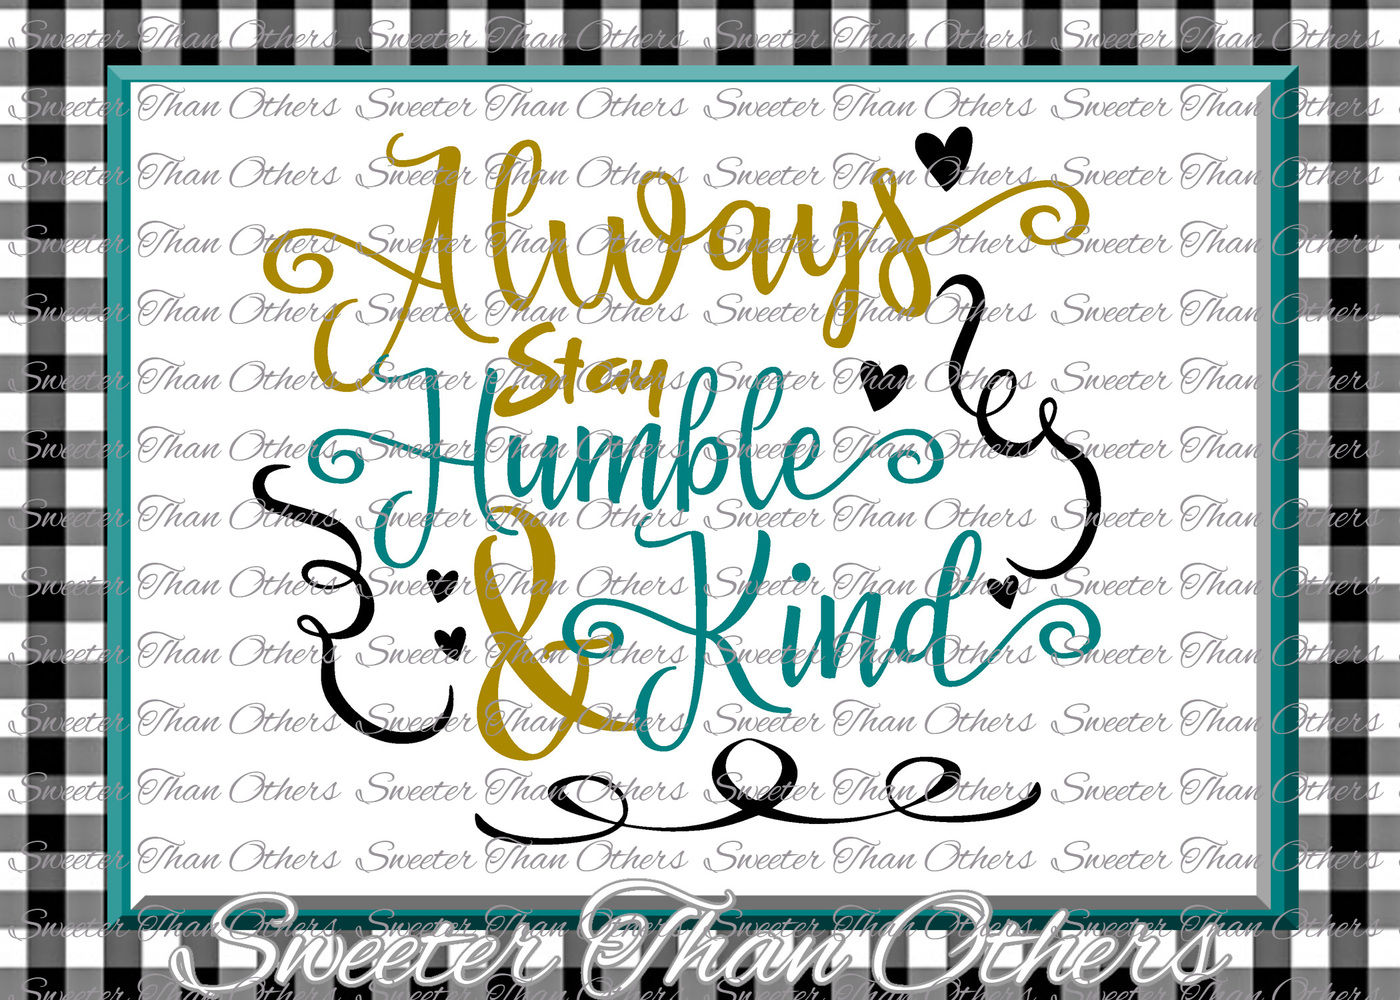 ori 59093 cf92c9e27896420538ad067ef0b1b400d9908a7f always stay humble and kind svg dxf silhouette studios cameo cricut cut file instant download always stay humble and kind htv design diy